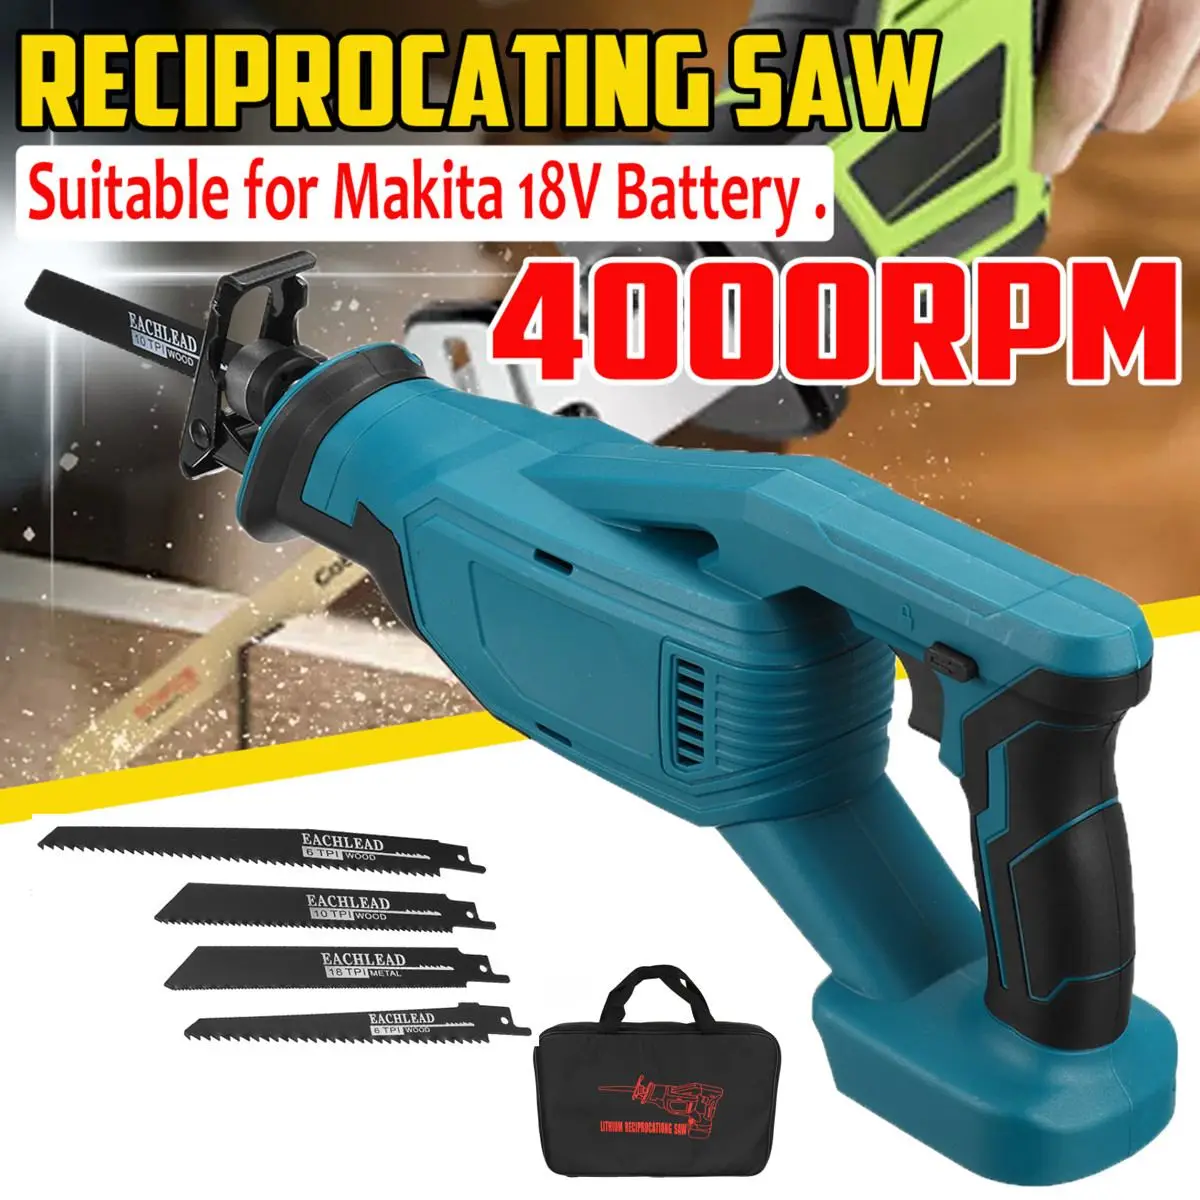 

Reciprocating Saw Household Electric Saw Chainsaw 4000RPM/min Electrical Wood Working Tools with 4 Blades for Makita 18V Battery